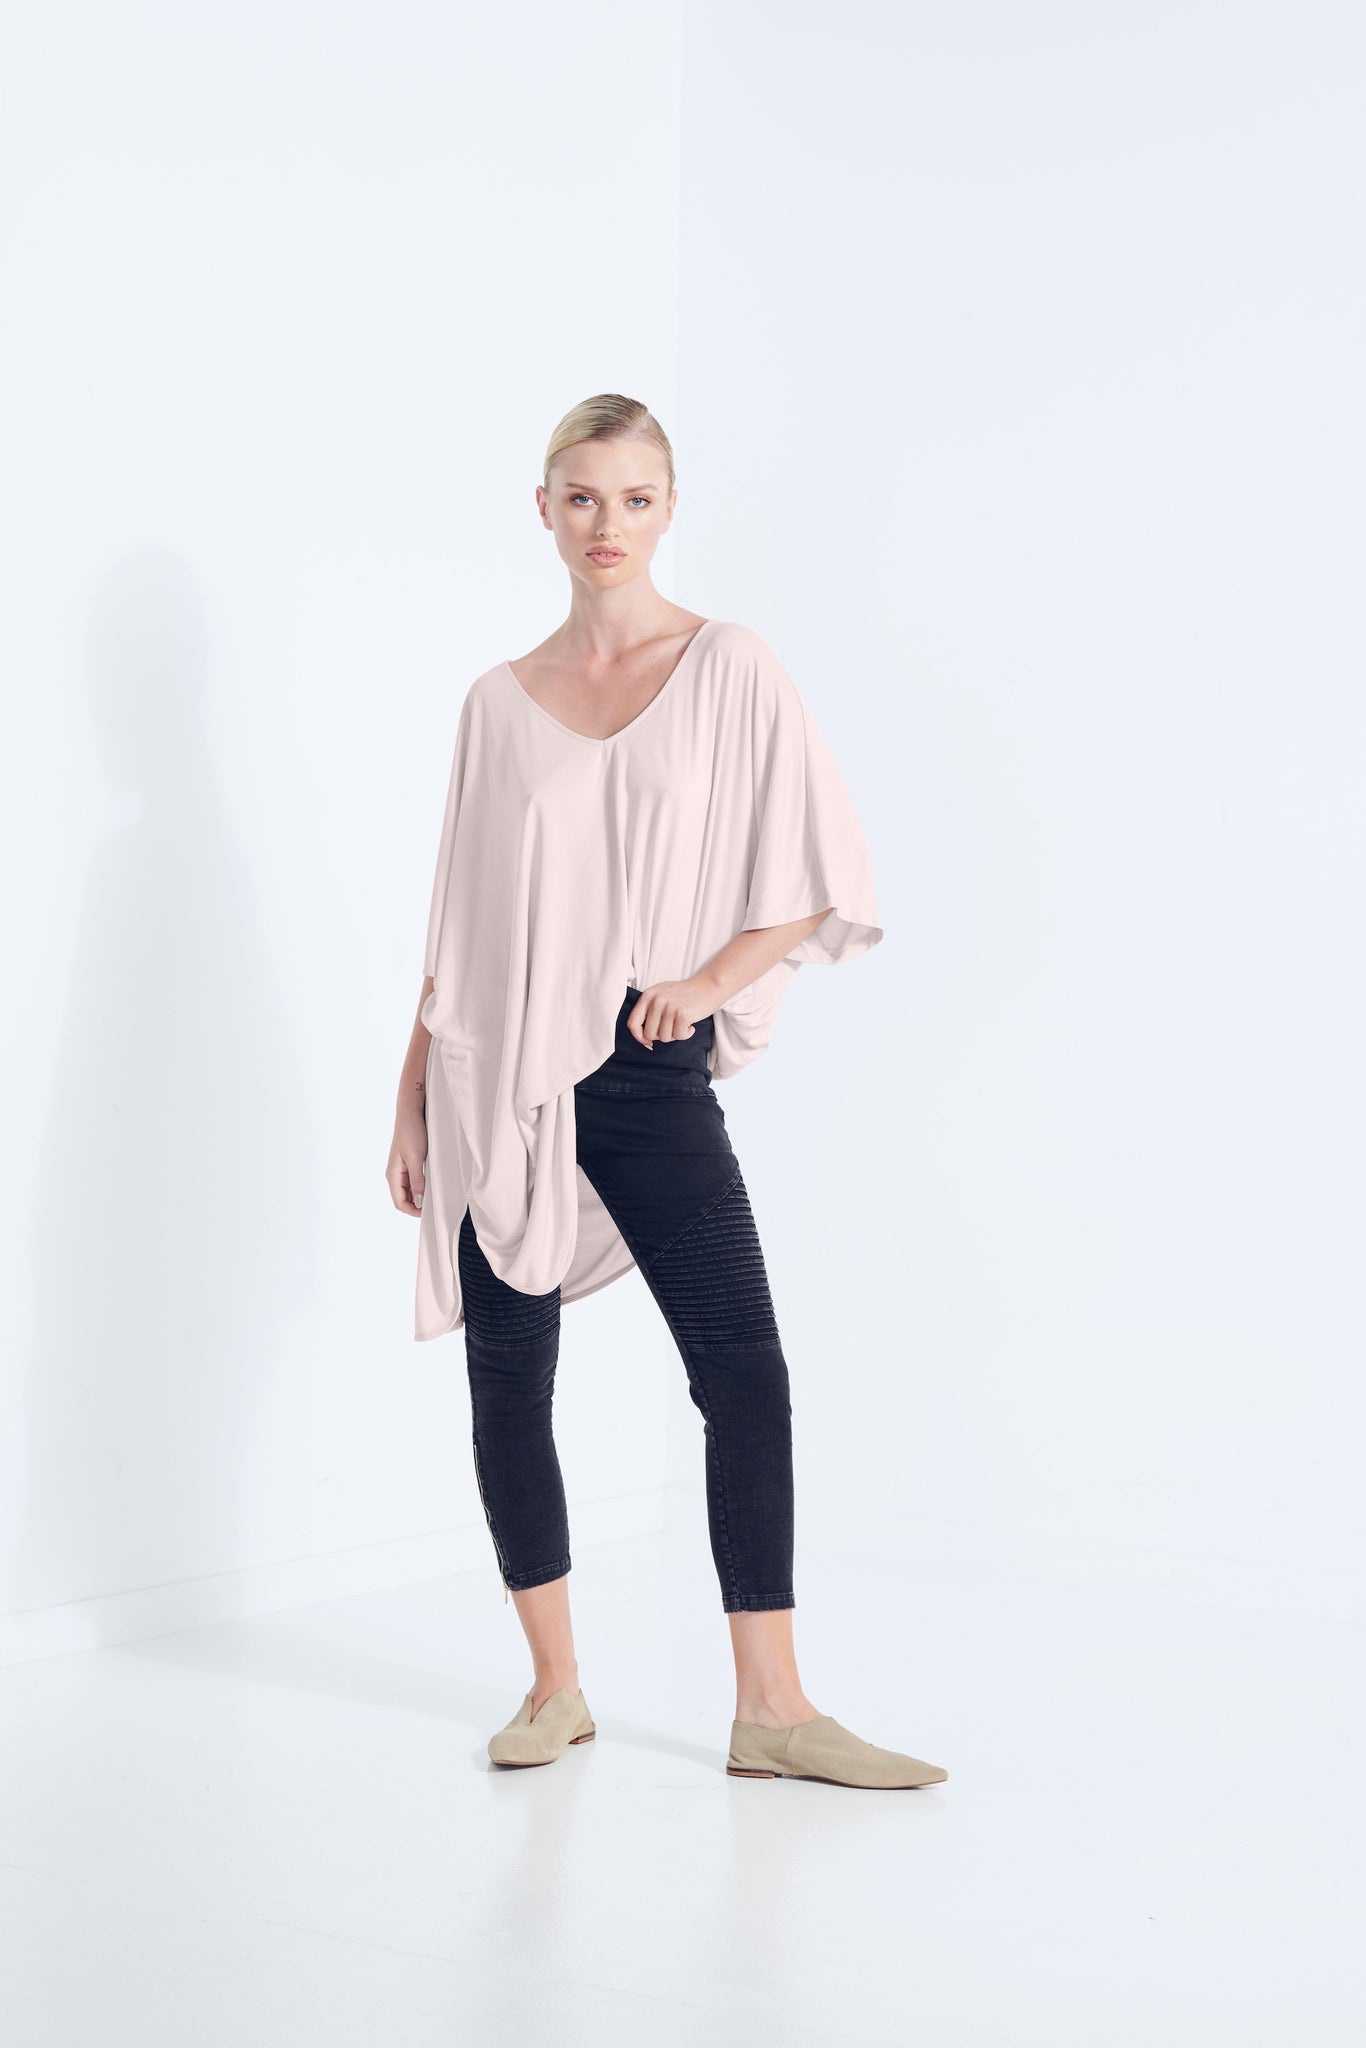 THEMIS DRESS LONGLINE T-SHIRT BEECHWOOD MODAL STRETCH WITH REMOVABLE TIE PIPISHELL WASHED PALE PINK  FRONT TEE VIEW